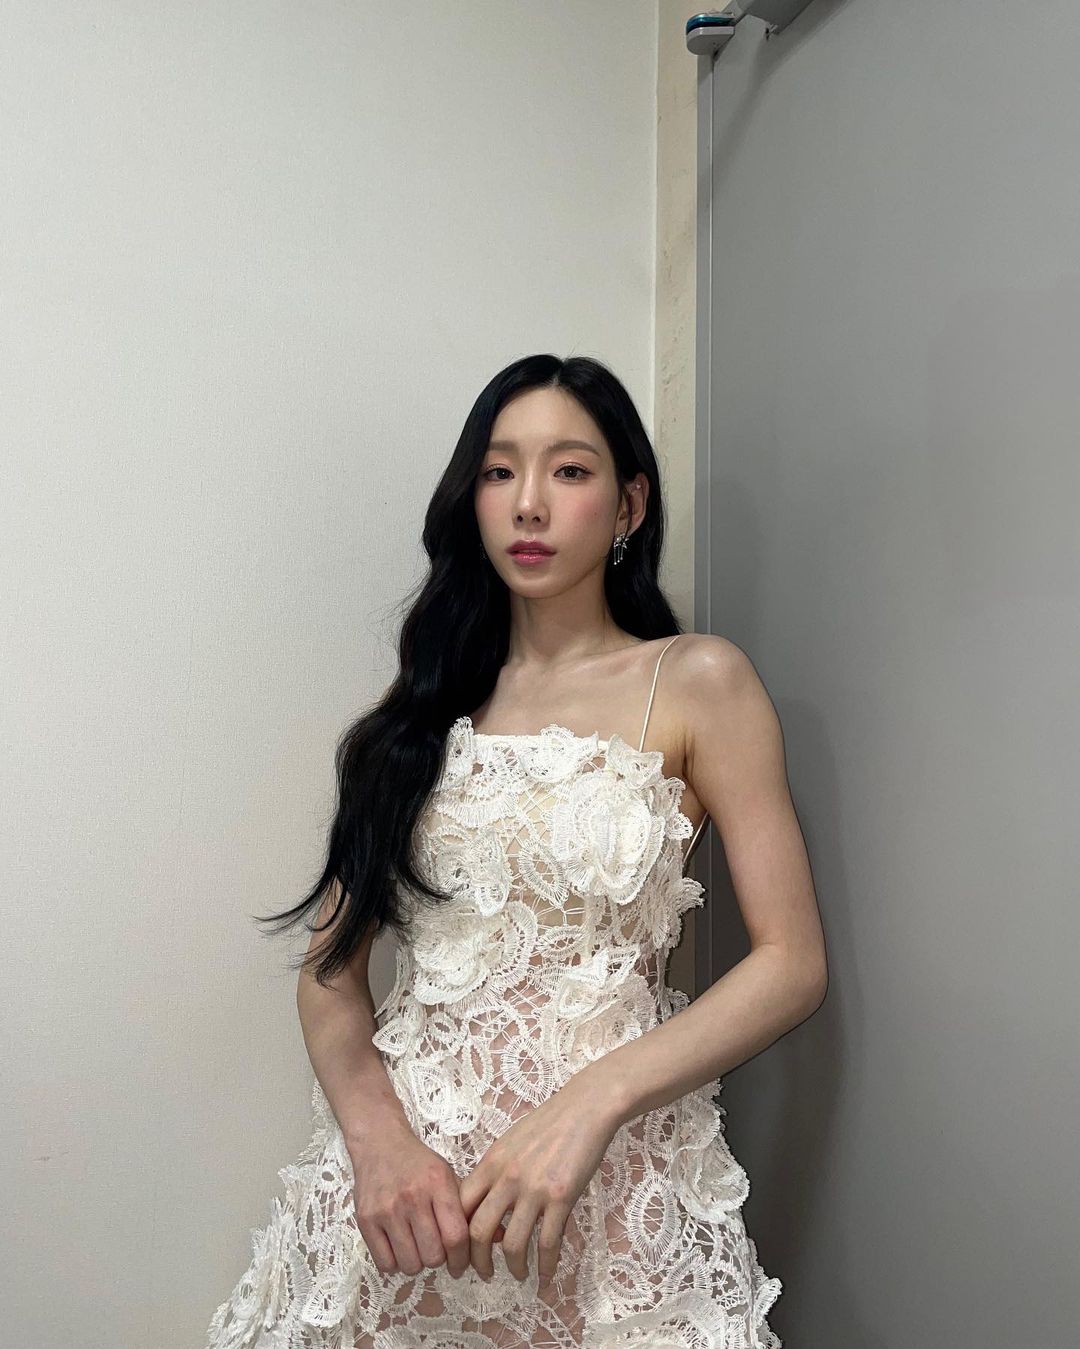 Girls' Generation Taeyeon, who the hell looks like she's in her 30s... Fairy beauty with a microfiber body